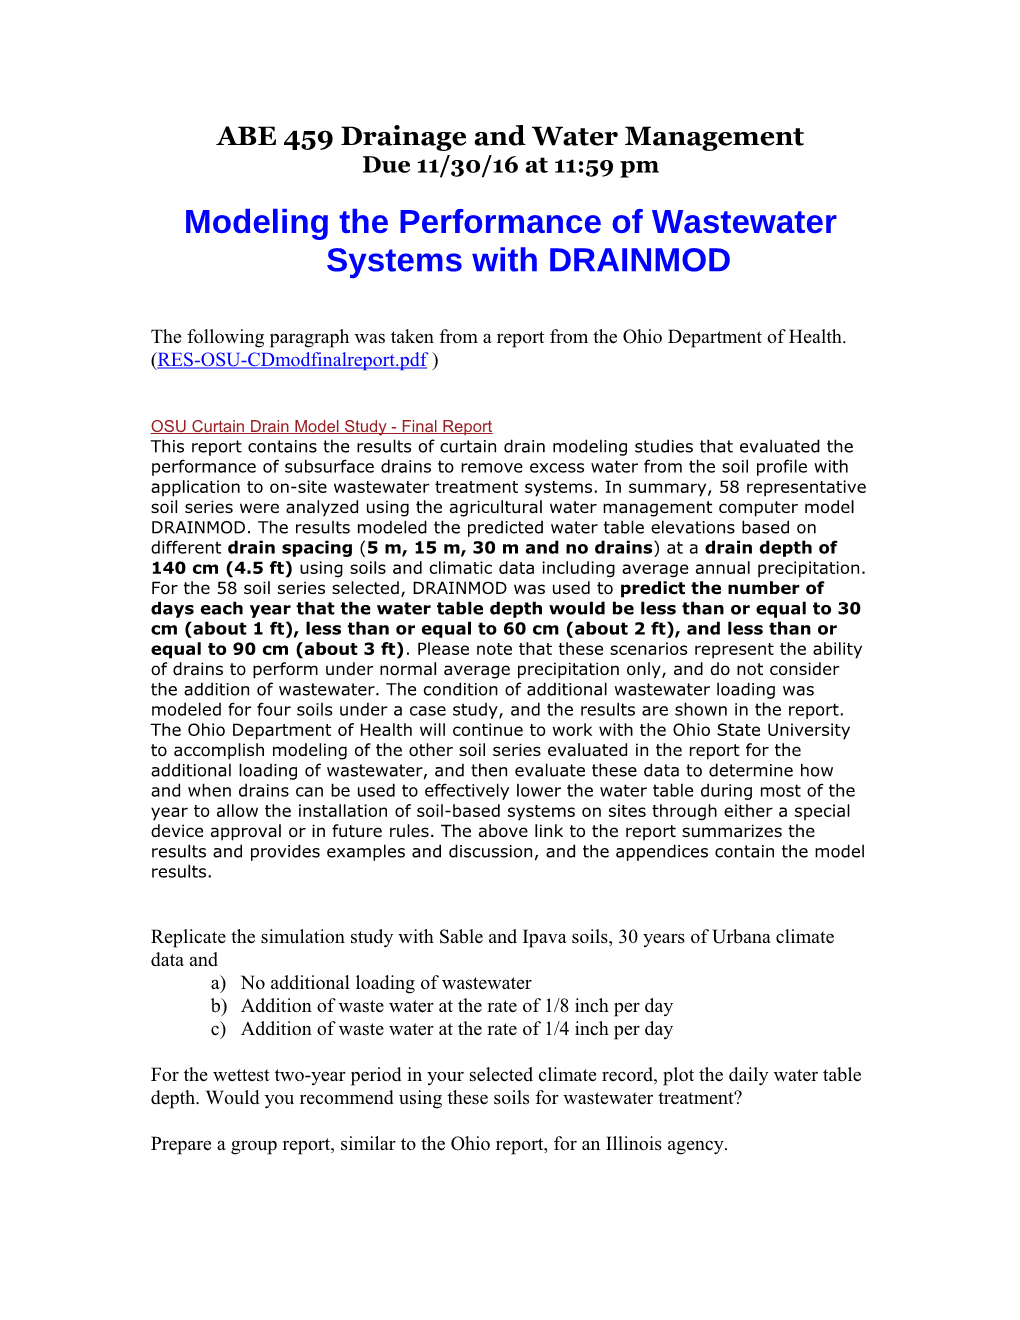 Modeling the Performance of Wastewater Systems with DRAINMOD